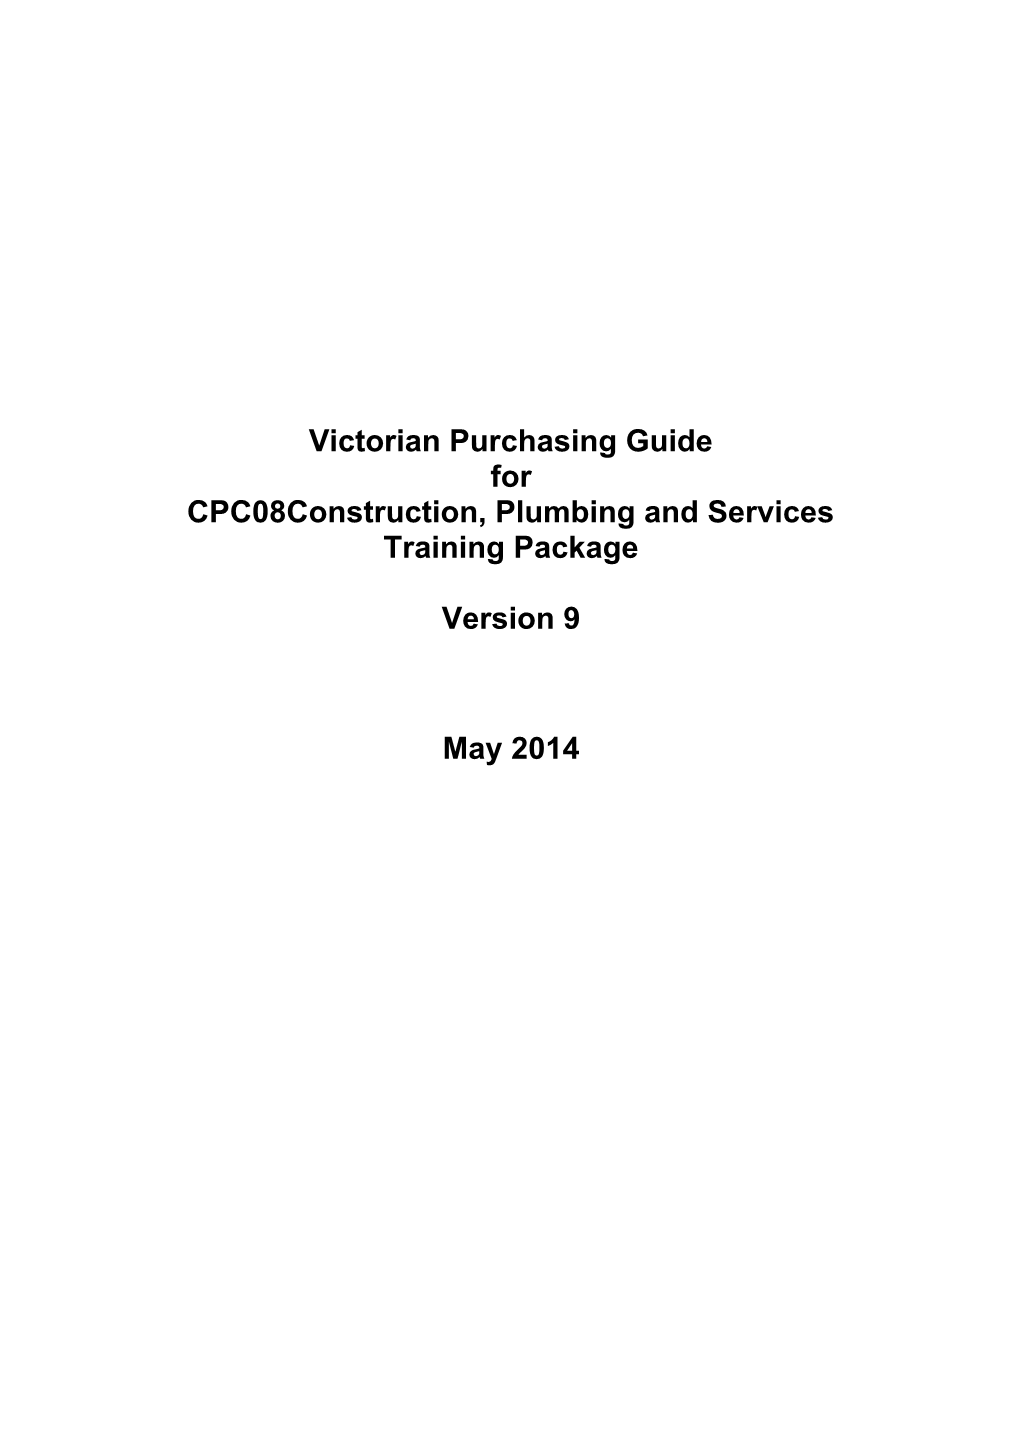 Victorian Purchasing Guide for CPC08 Construction, Plumbing and Services Version 9